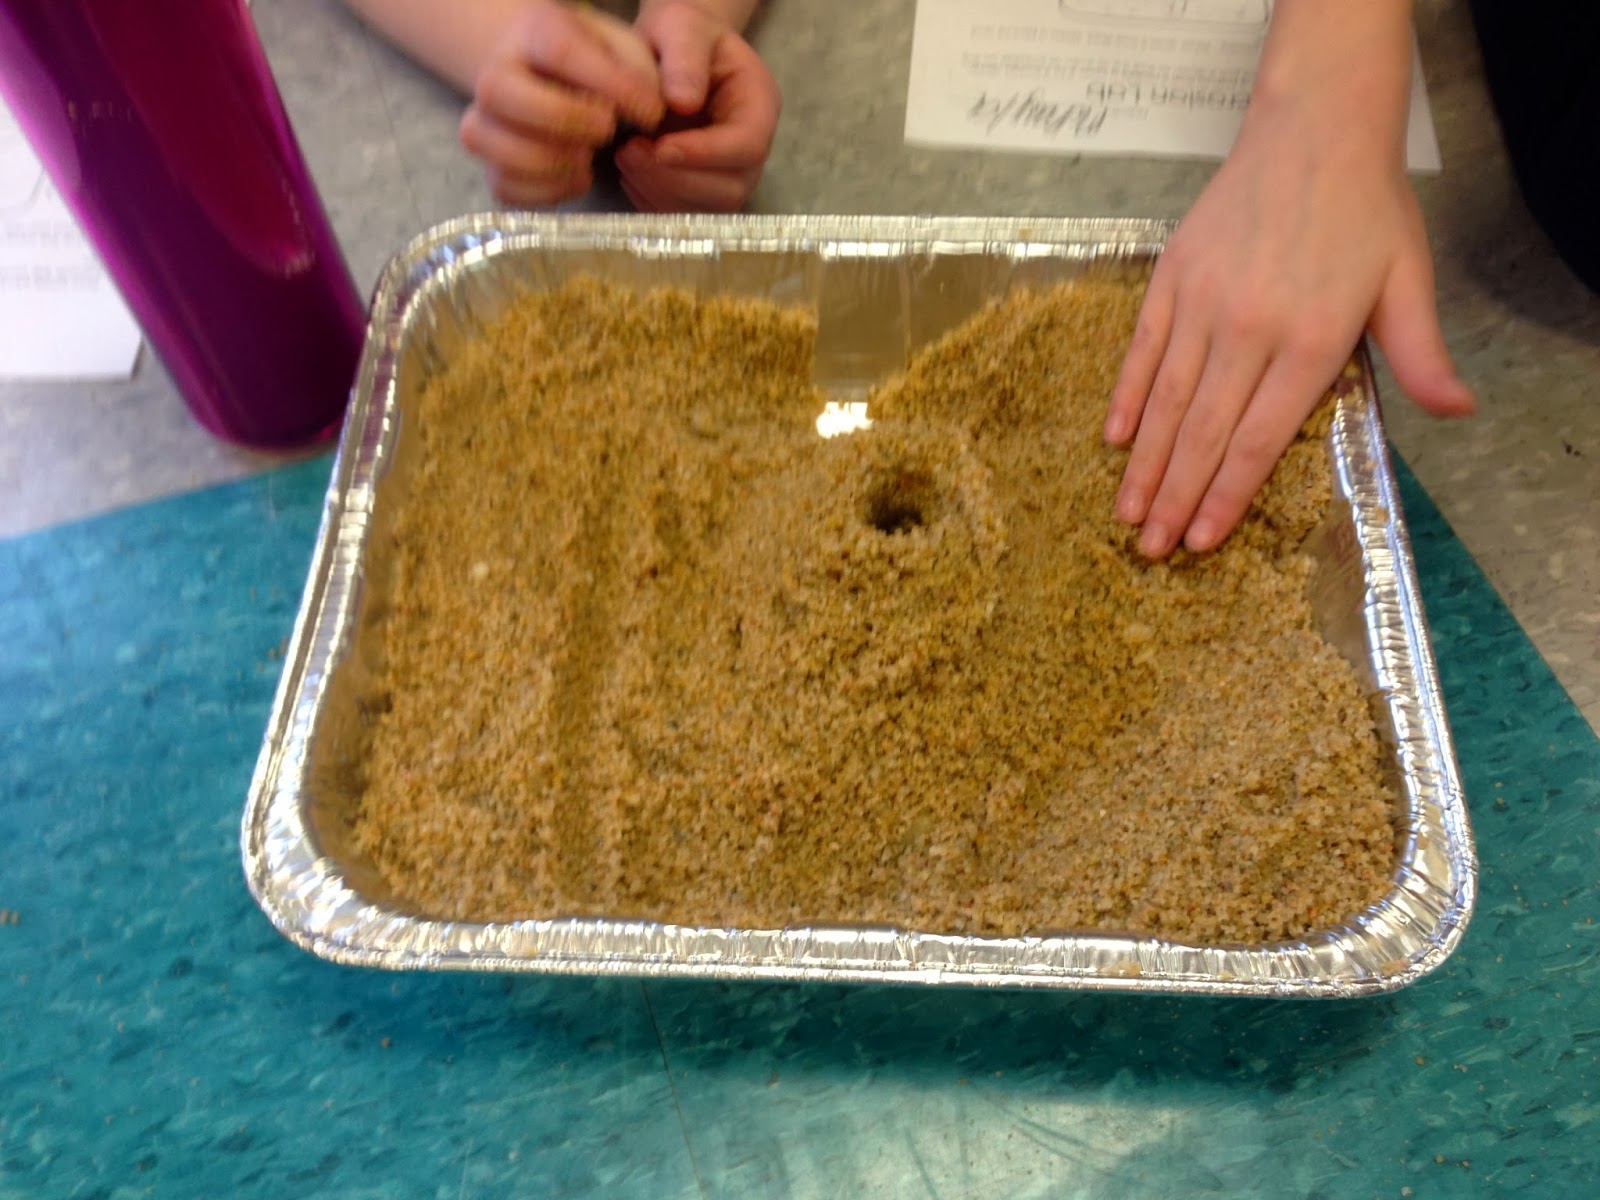 Are you teaching about rocks and minerals? Grab this FREE science lab on erosion that your students will LOVE!